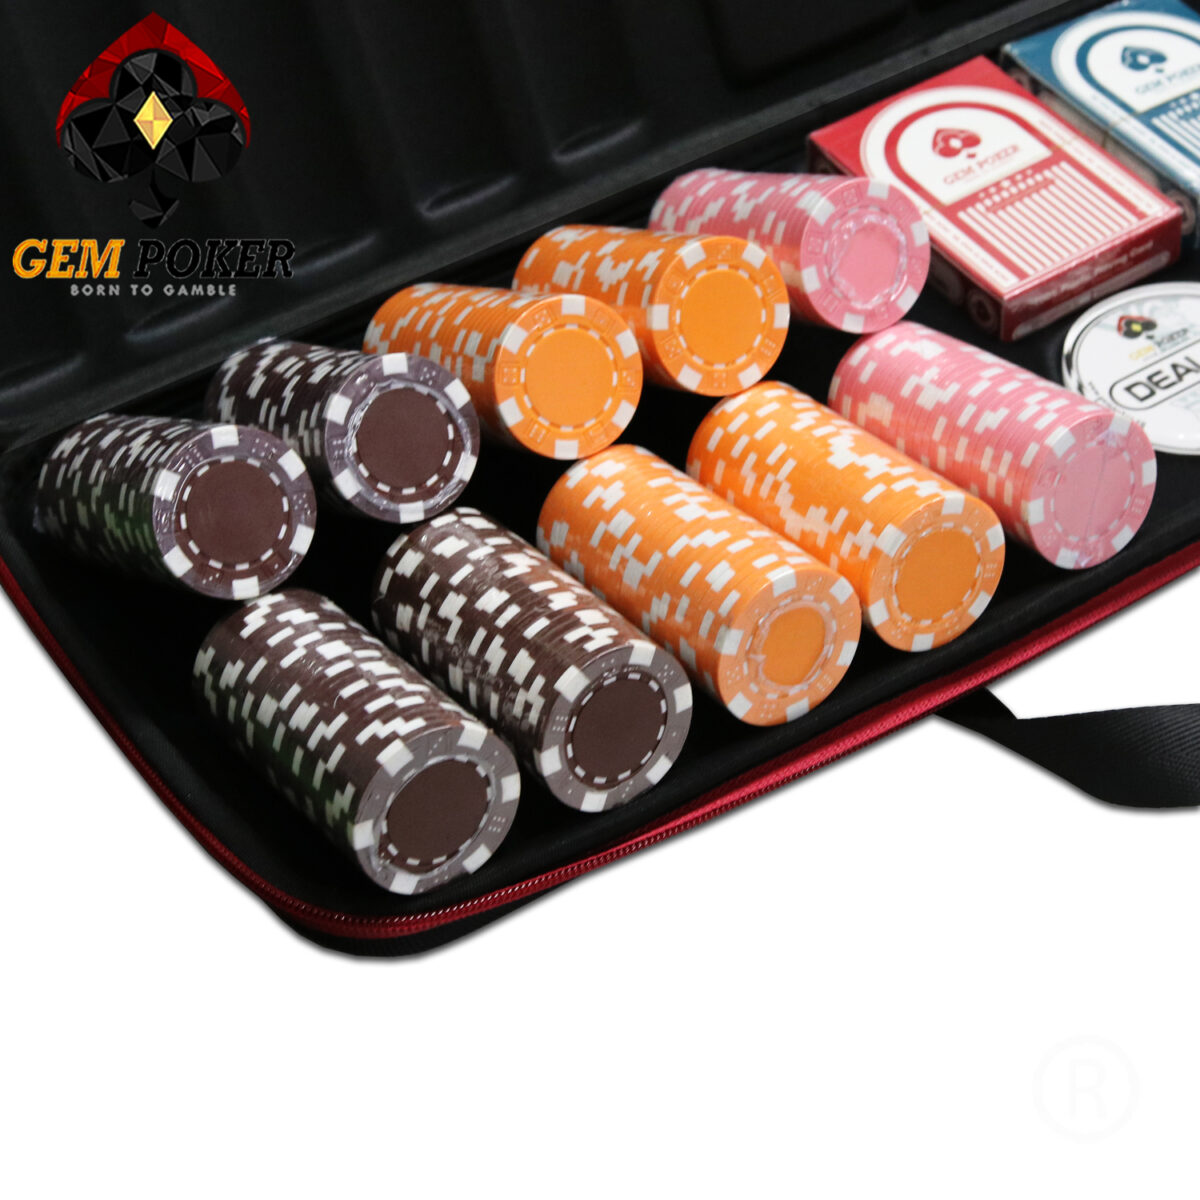 TRAVEL SET 500 ABS POKER CHIPS 5 COLORS